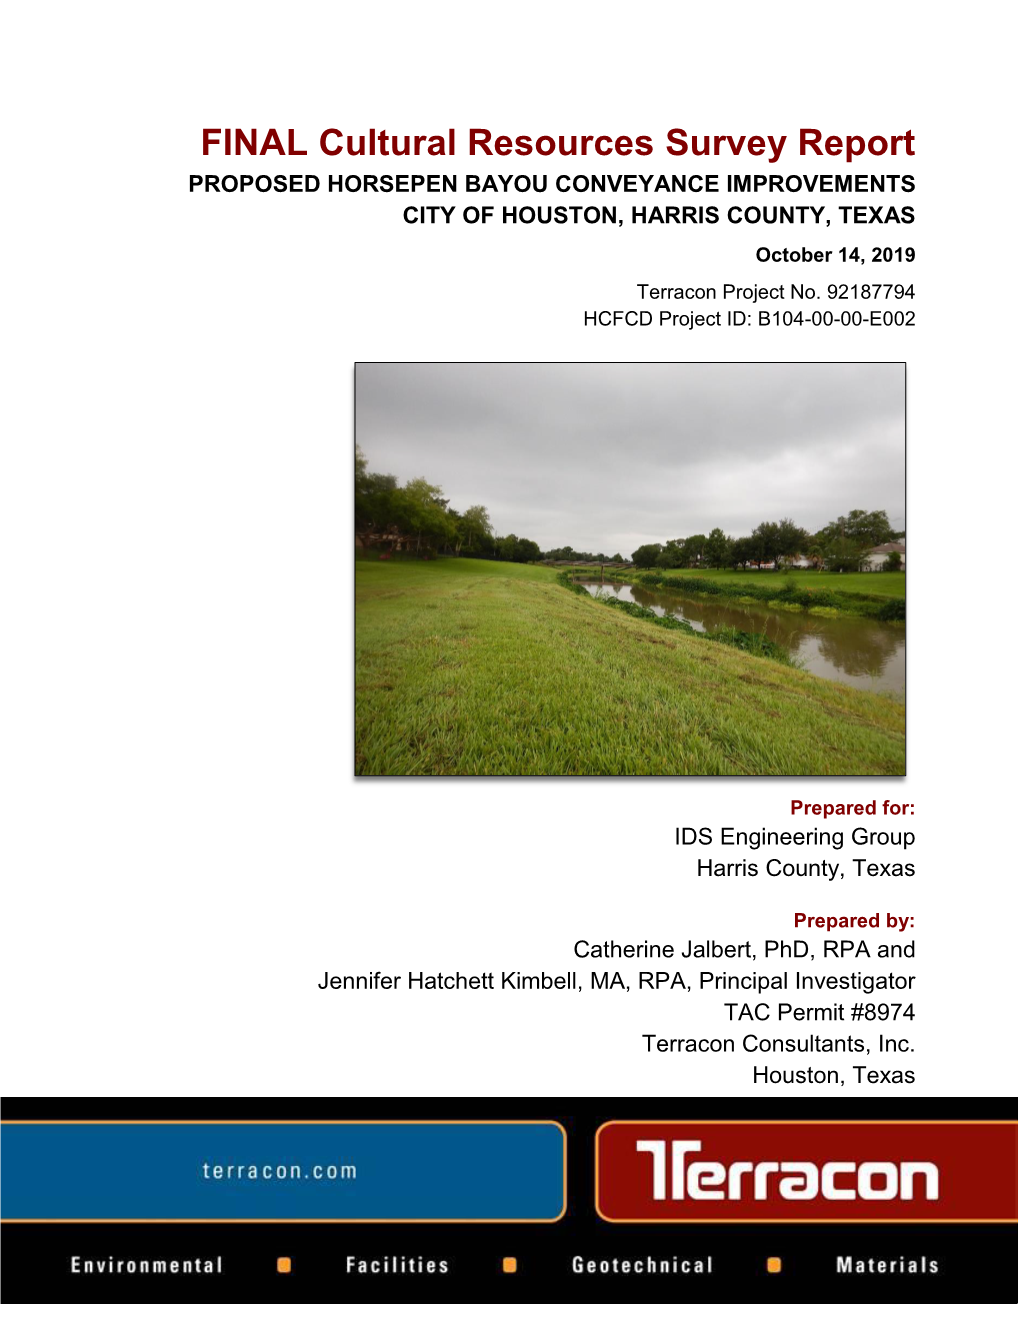 FINAL Cultural Resources Survey Report PROPOSED HORSEPEN BAYOU CONVEYANCE IMPROVEMENTS CITY of HOUSTON, HARRIS COUNTY, TEXAS October 14, 2019 Terracon Project No